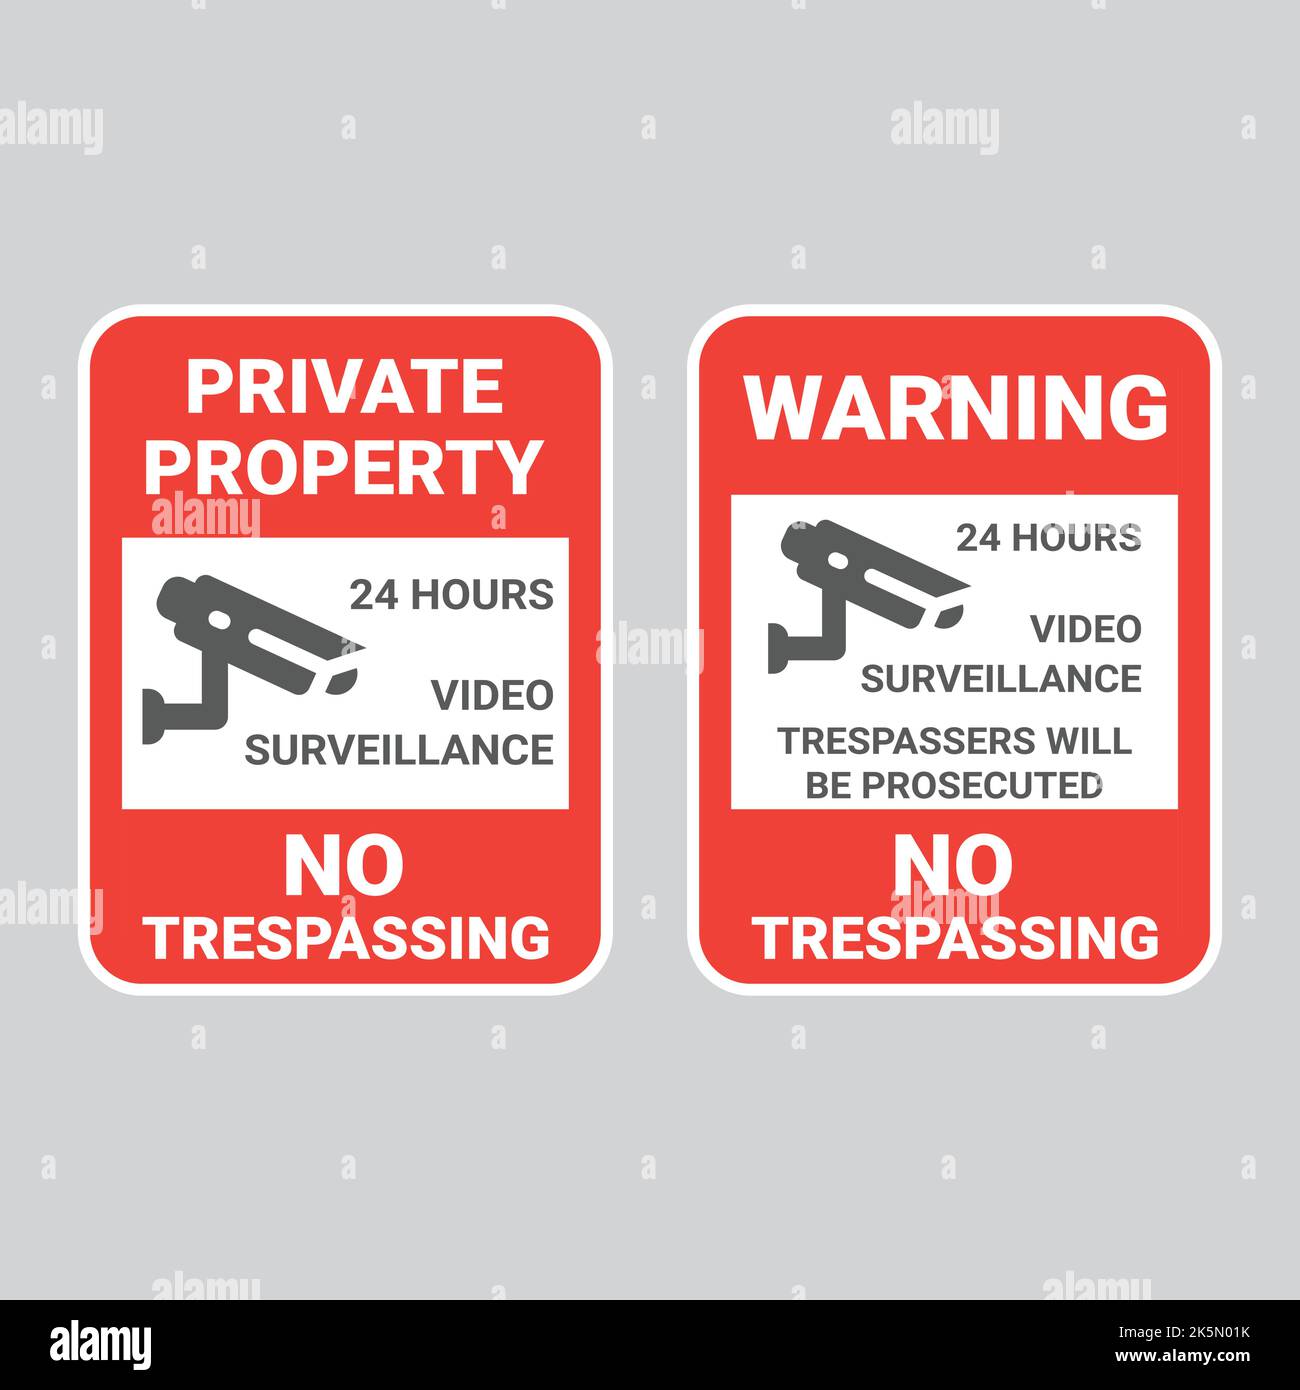 Private property and 24 hour video surveillance sign. No trespassing red vector warning label sticker. Stock Vector